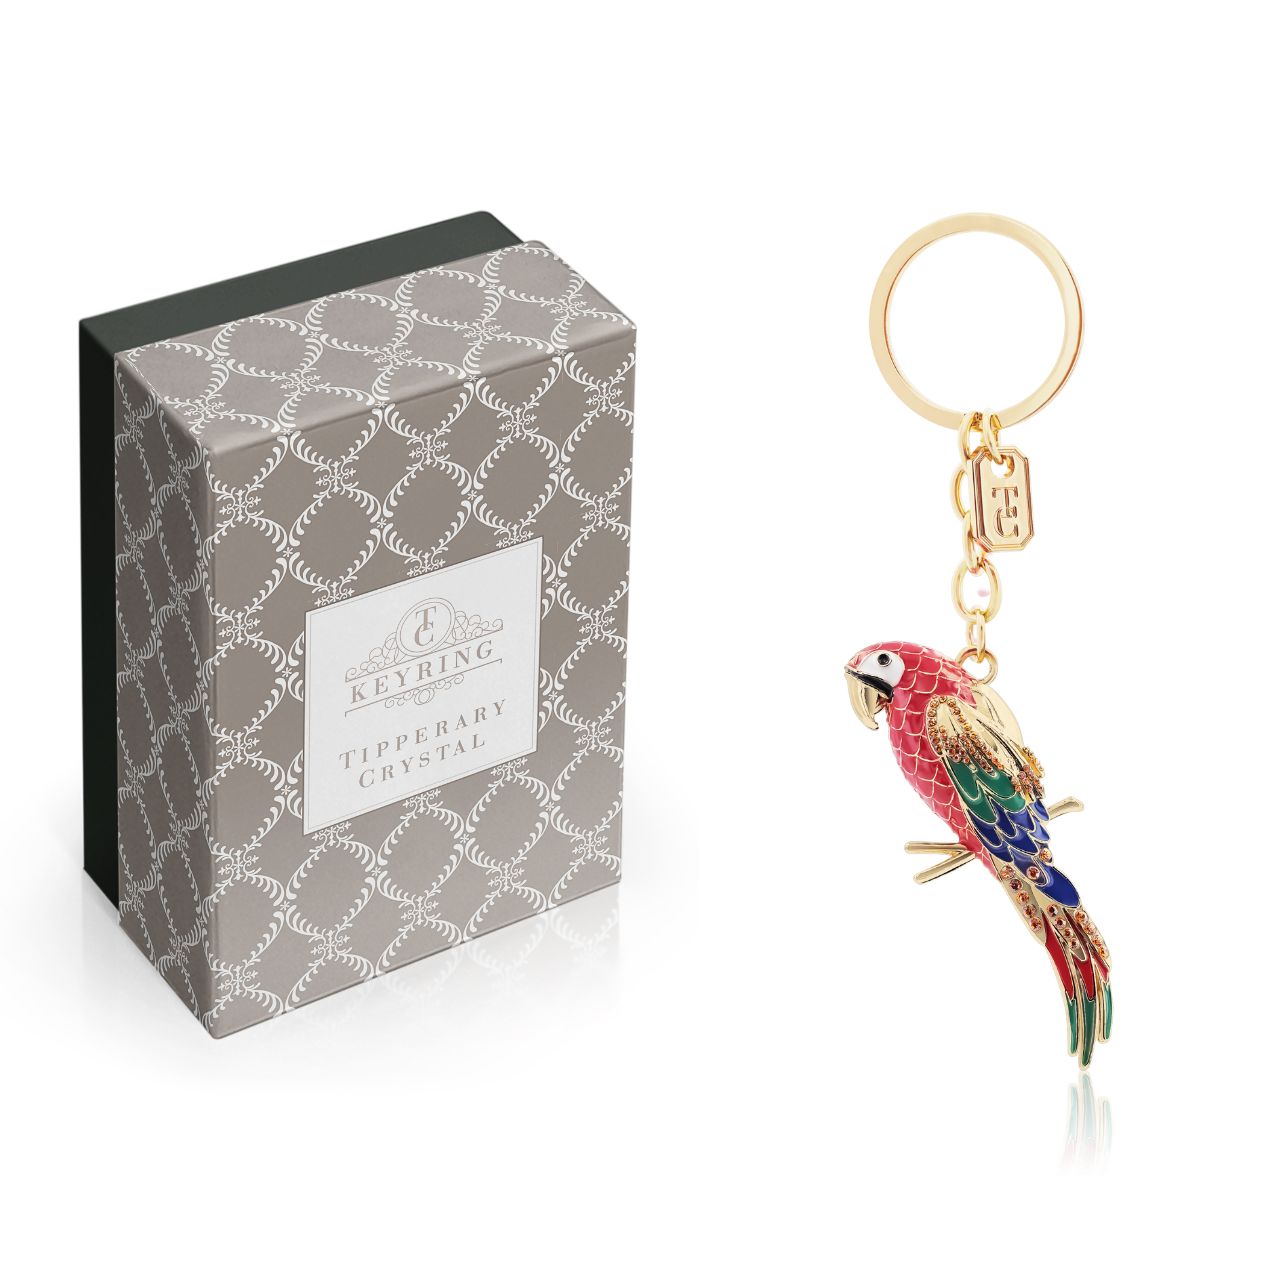 Parrot Keyring by Tipperary Crystal  Transform your keys to a fashion statement with this beautiful Parrot Keyring keyring.